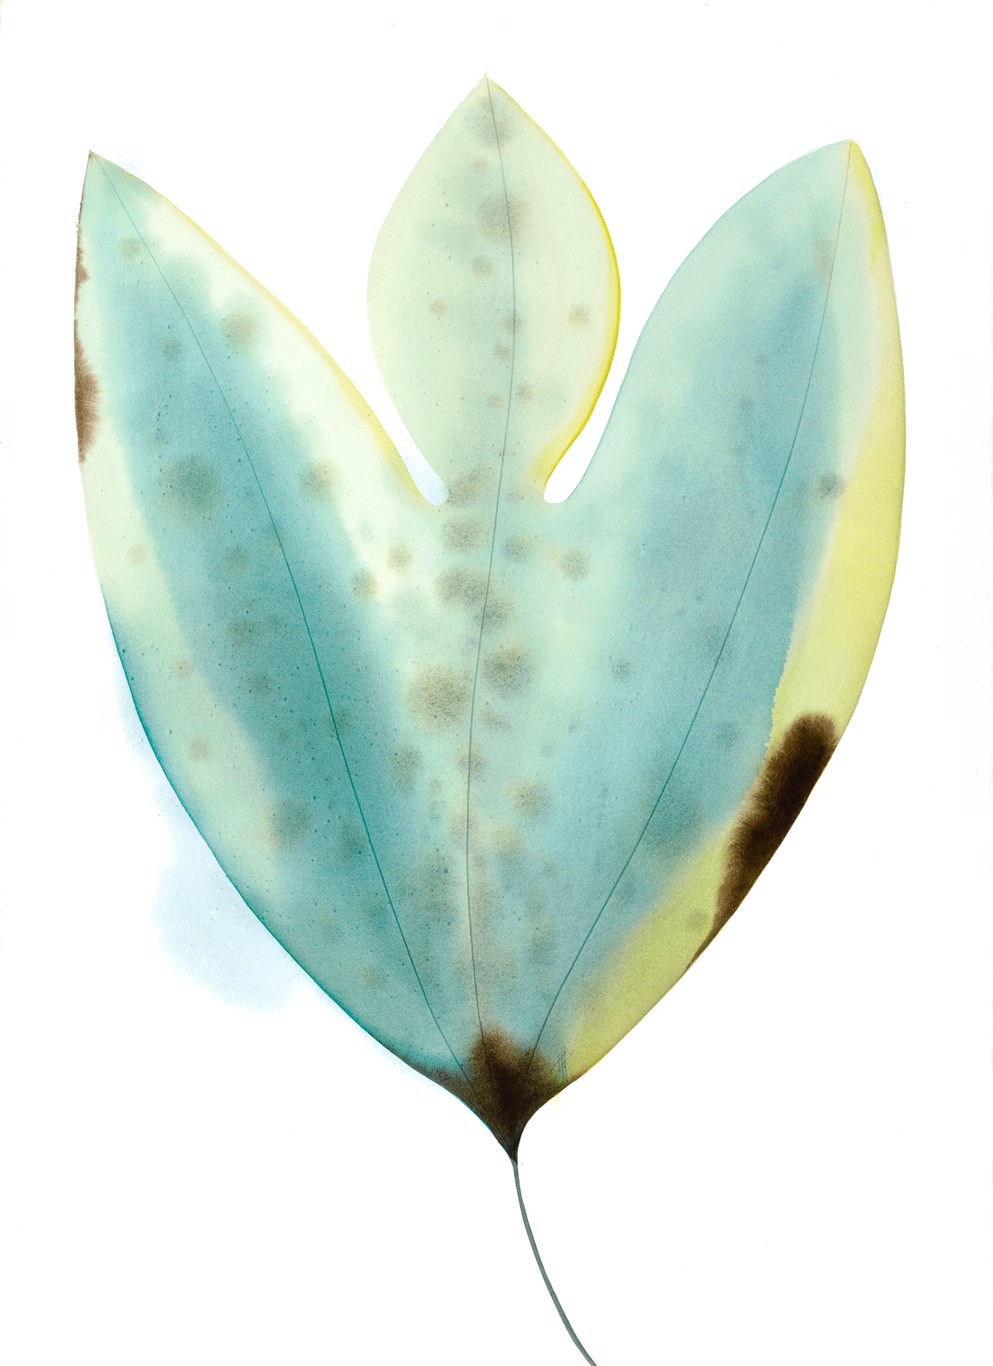 A watercolor painting of a leaf with shades of blue, green, and yellow, showing delicate veins and spots.